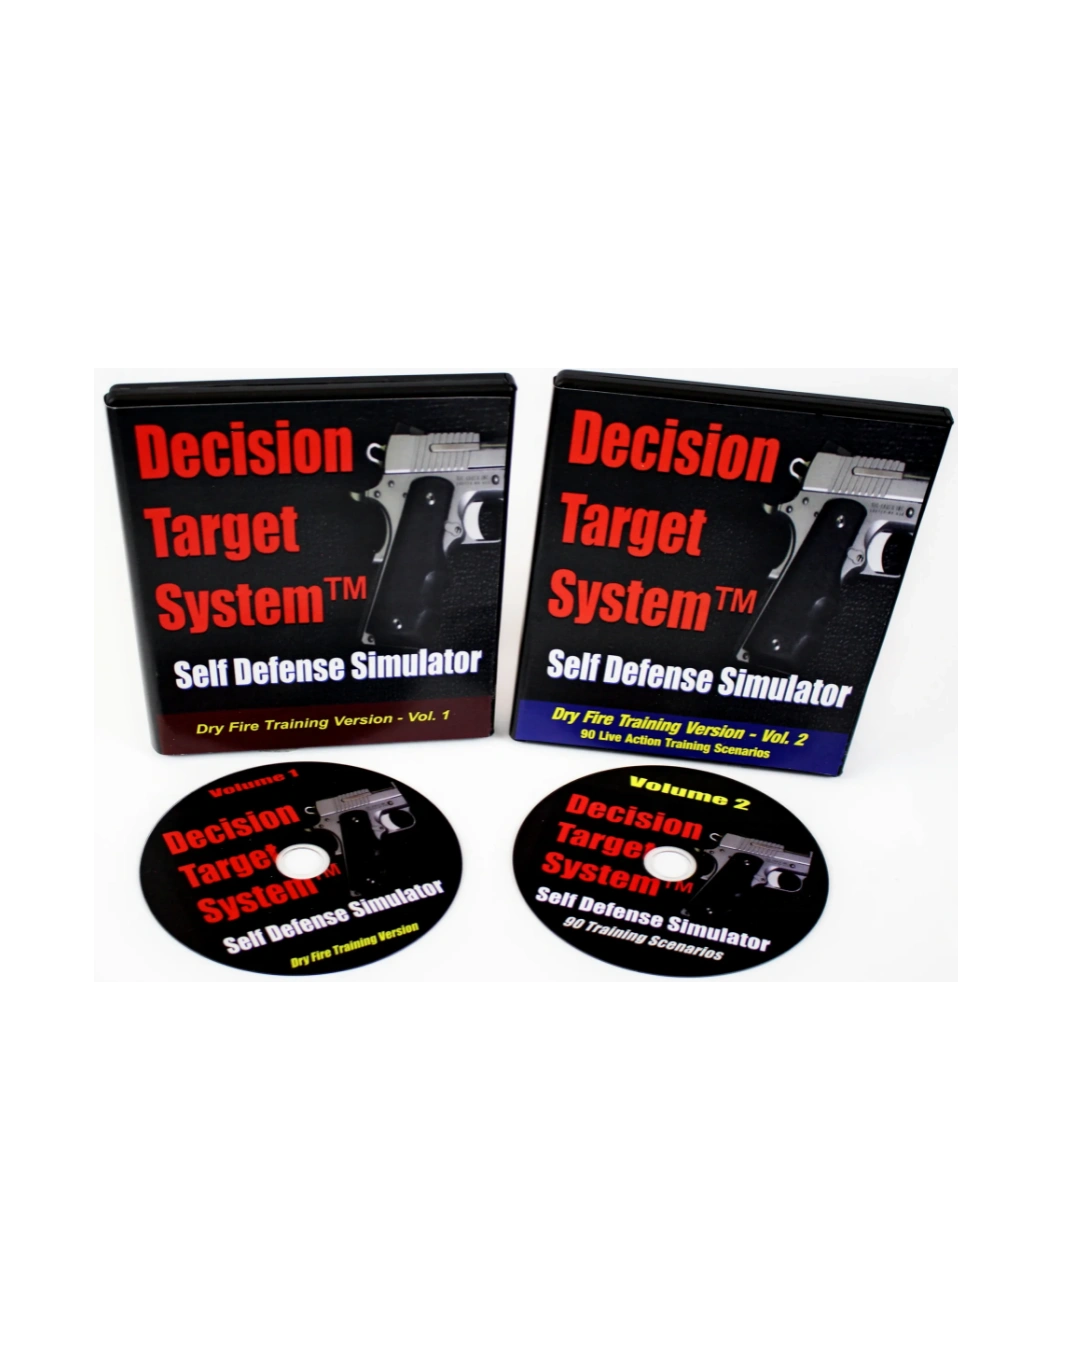 Concealed Carry Simulator Details about   Dry Fire Training Decision Target System 